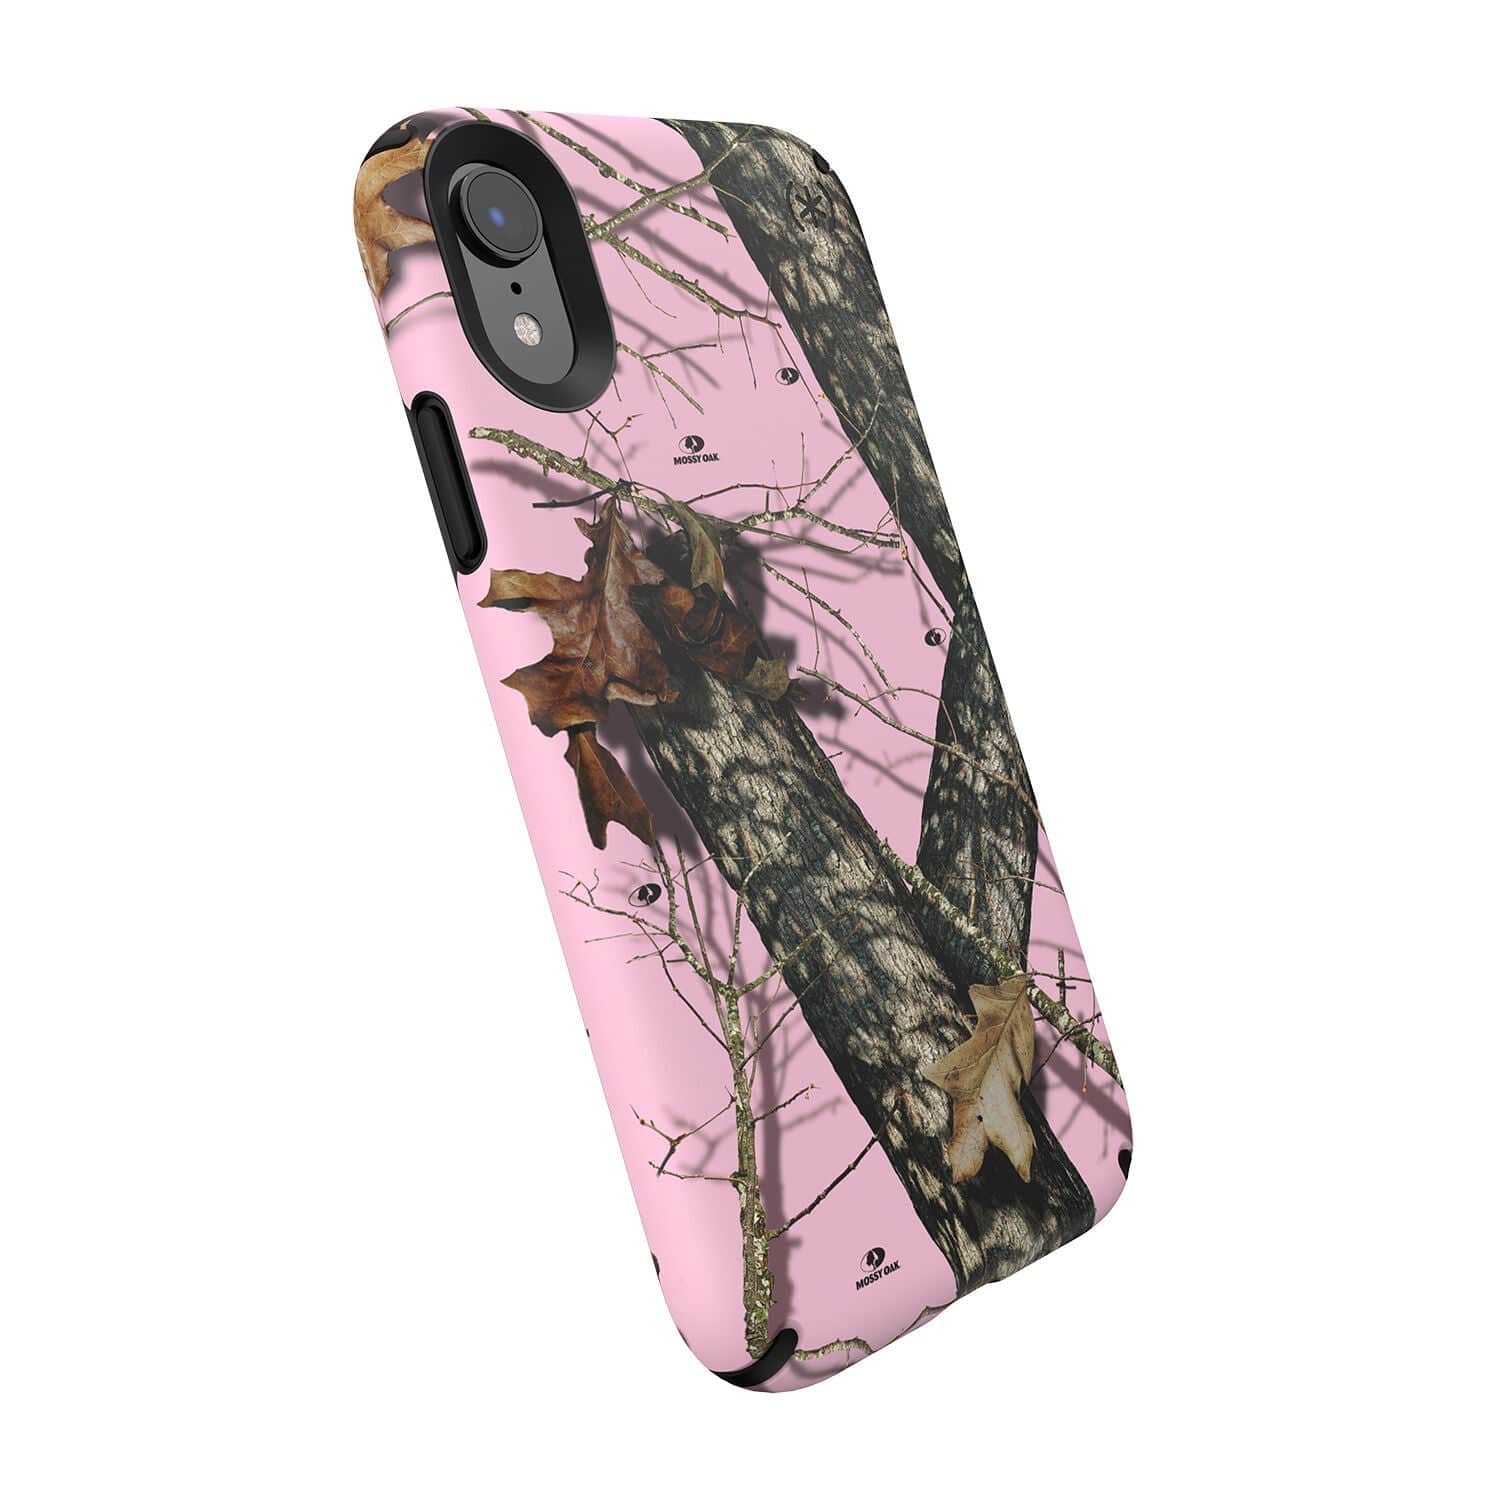 Speck Presidio Inked Mossy Oak Edition iPhone XR Cases Best iPhone XR  $37.47